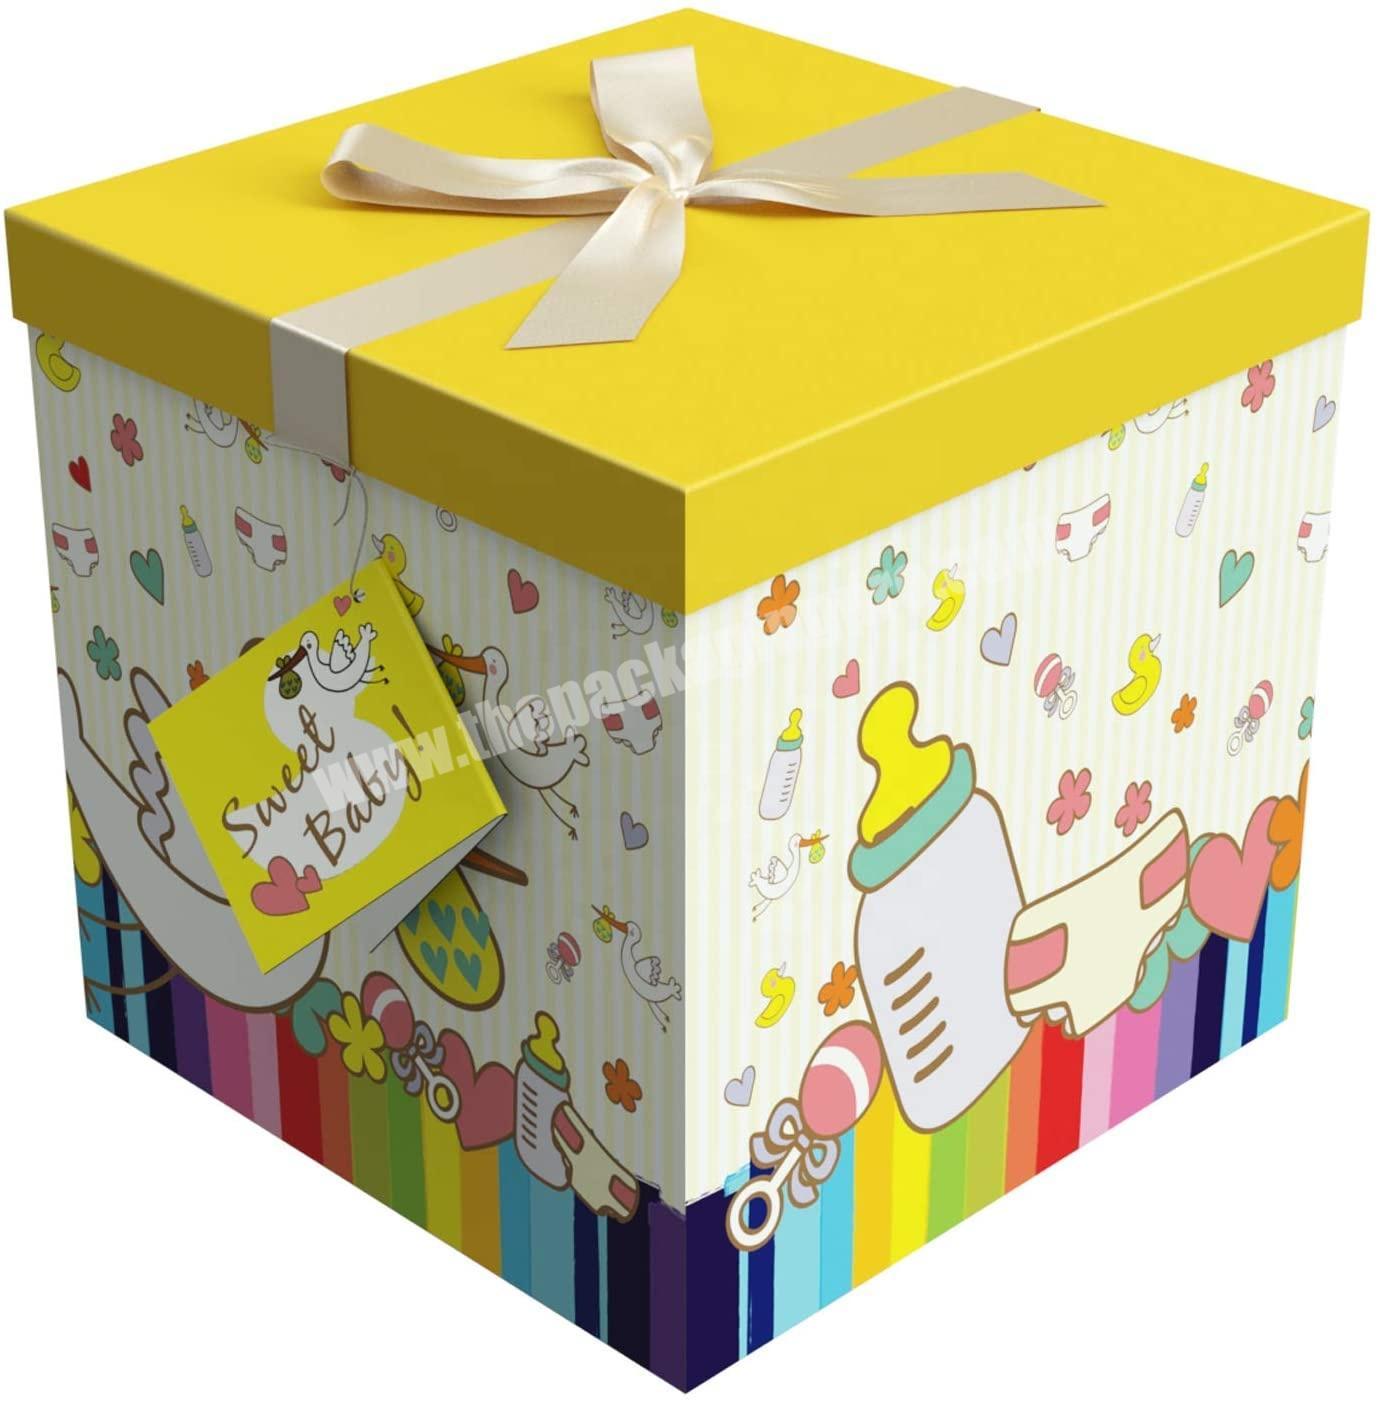 Gift Box easy to assemble & reusable No glue required  for children's gifts and bridal showers